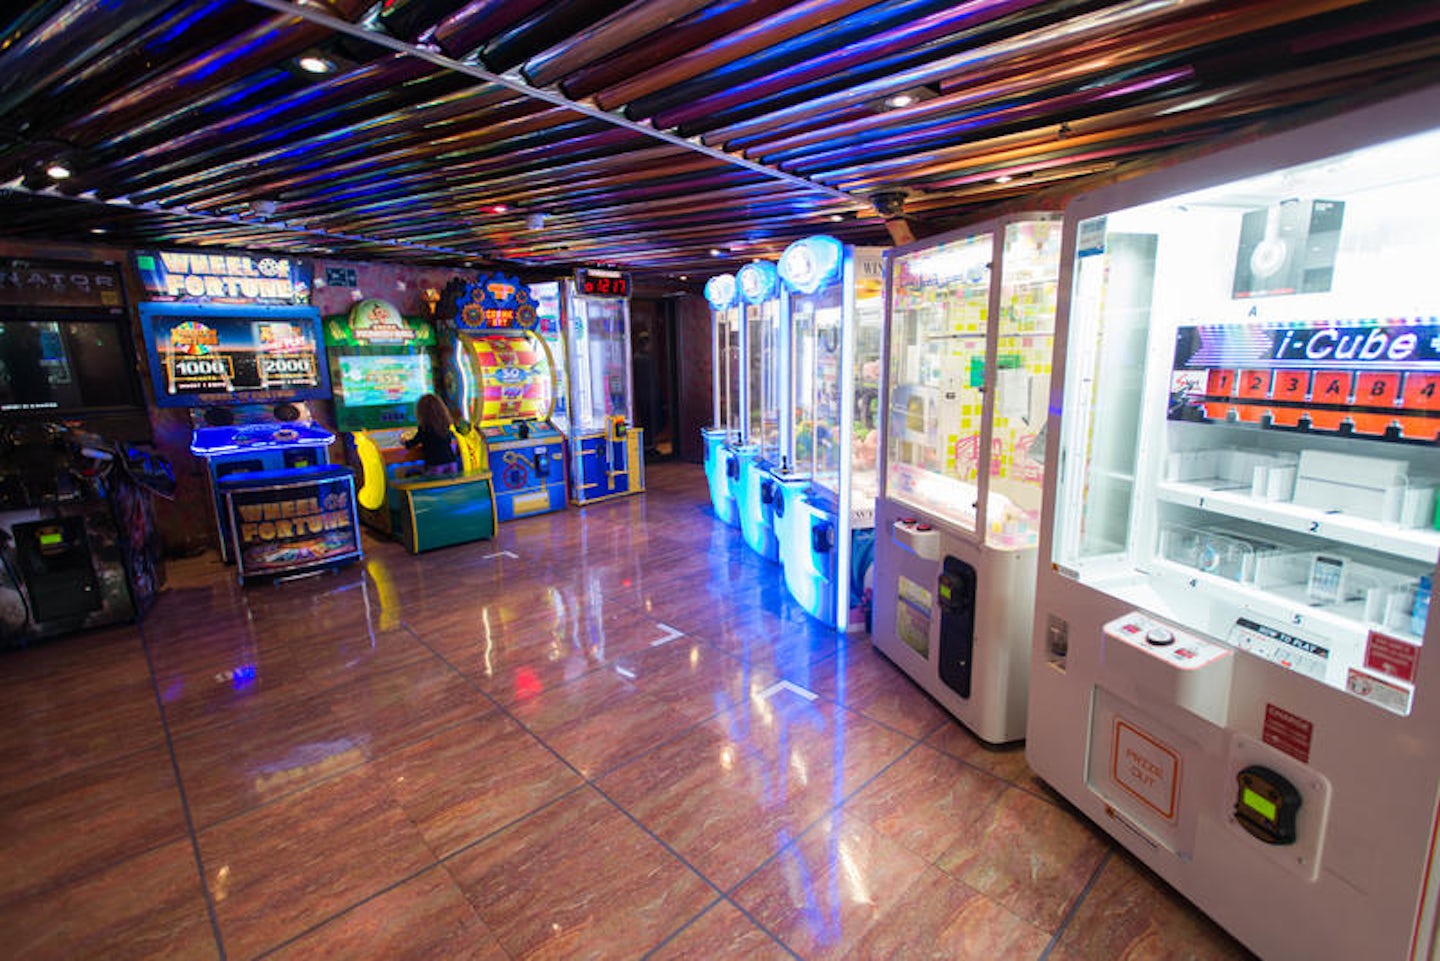 Real Virtuality Video Arcade on Carnival Pride